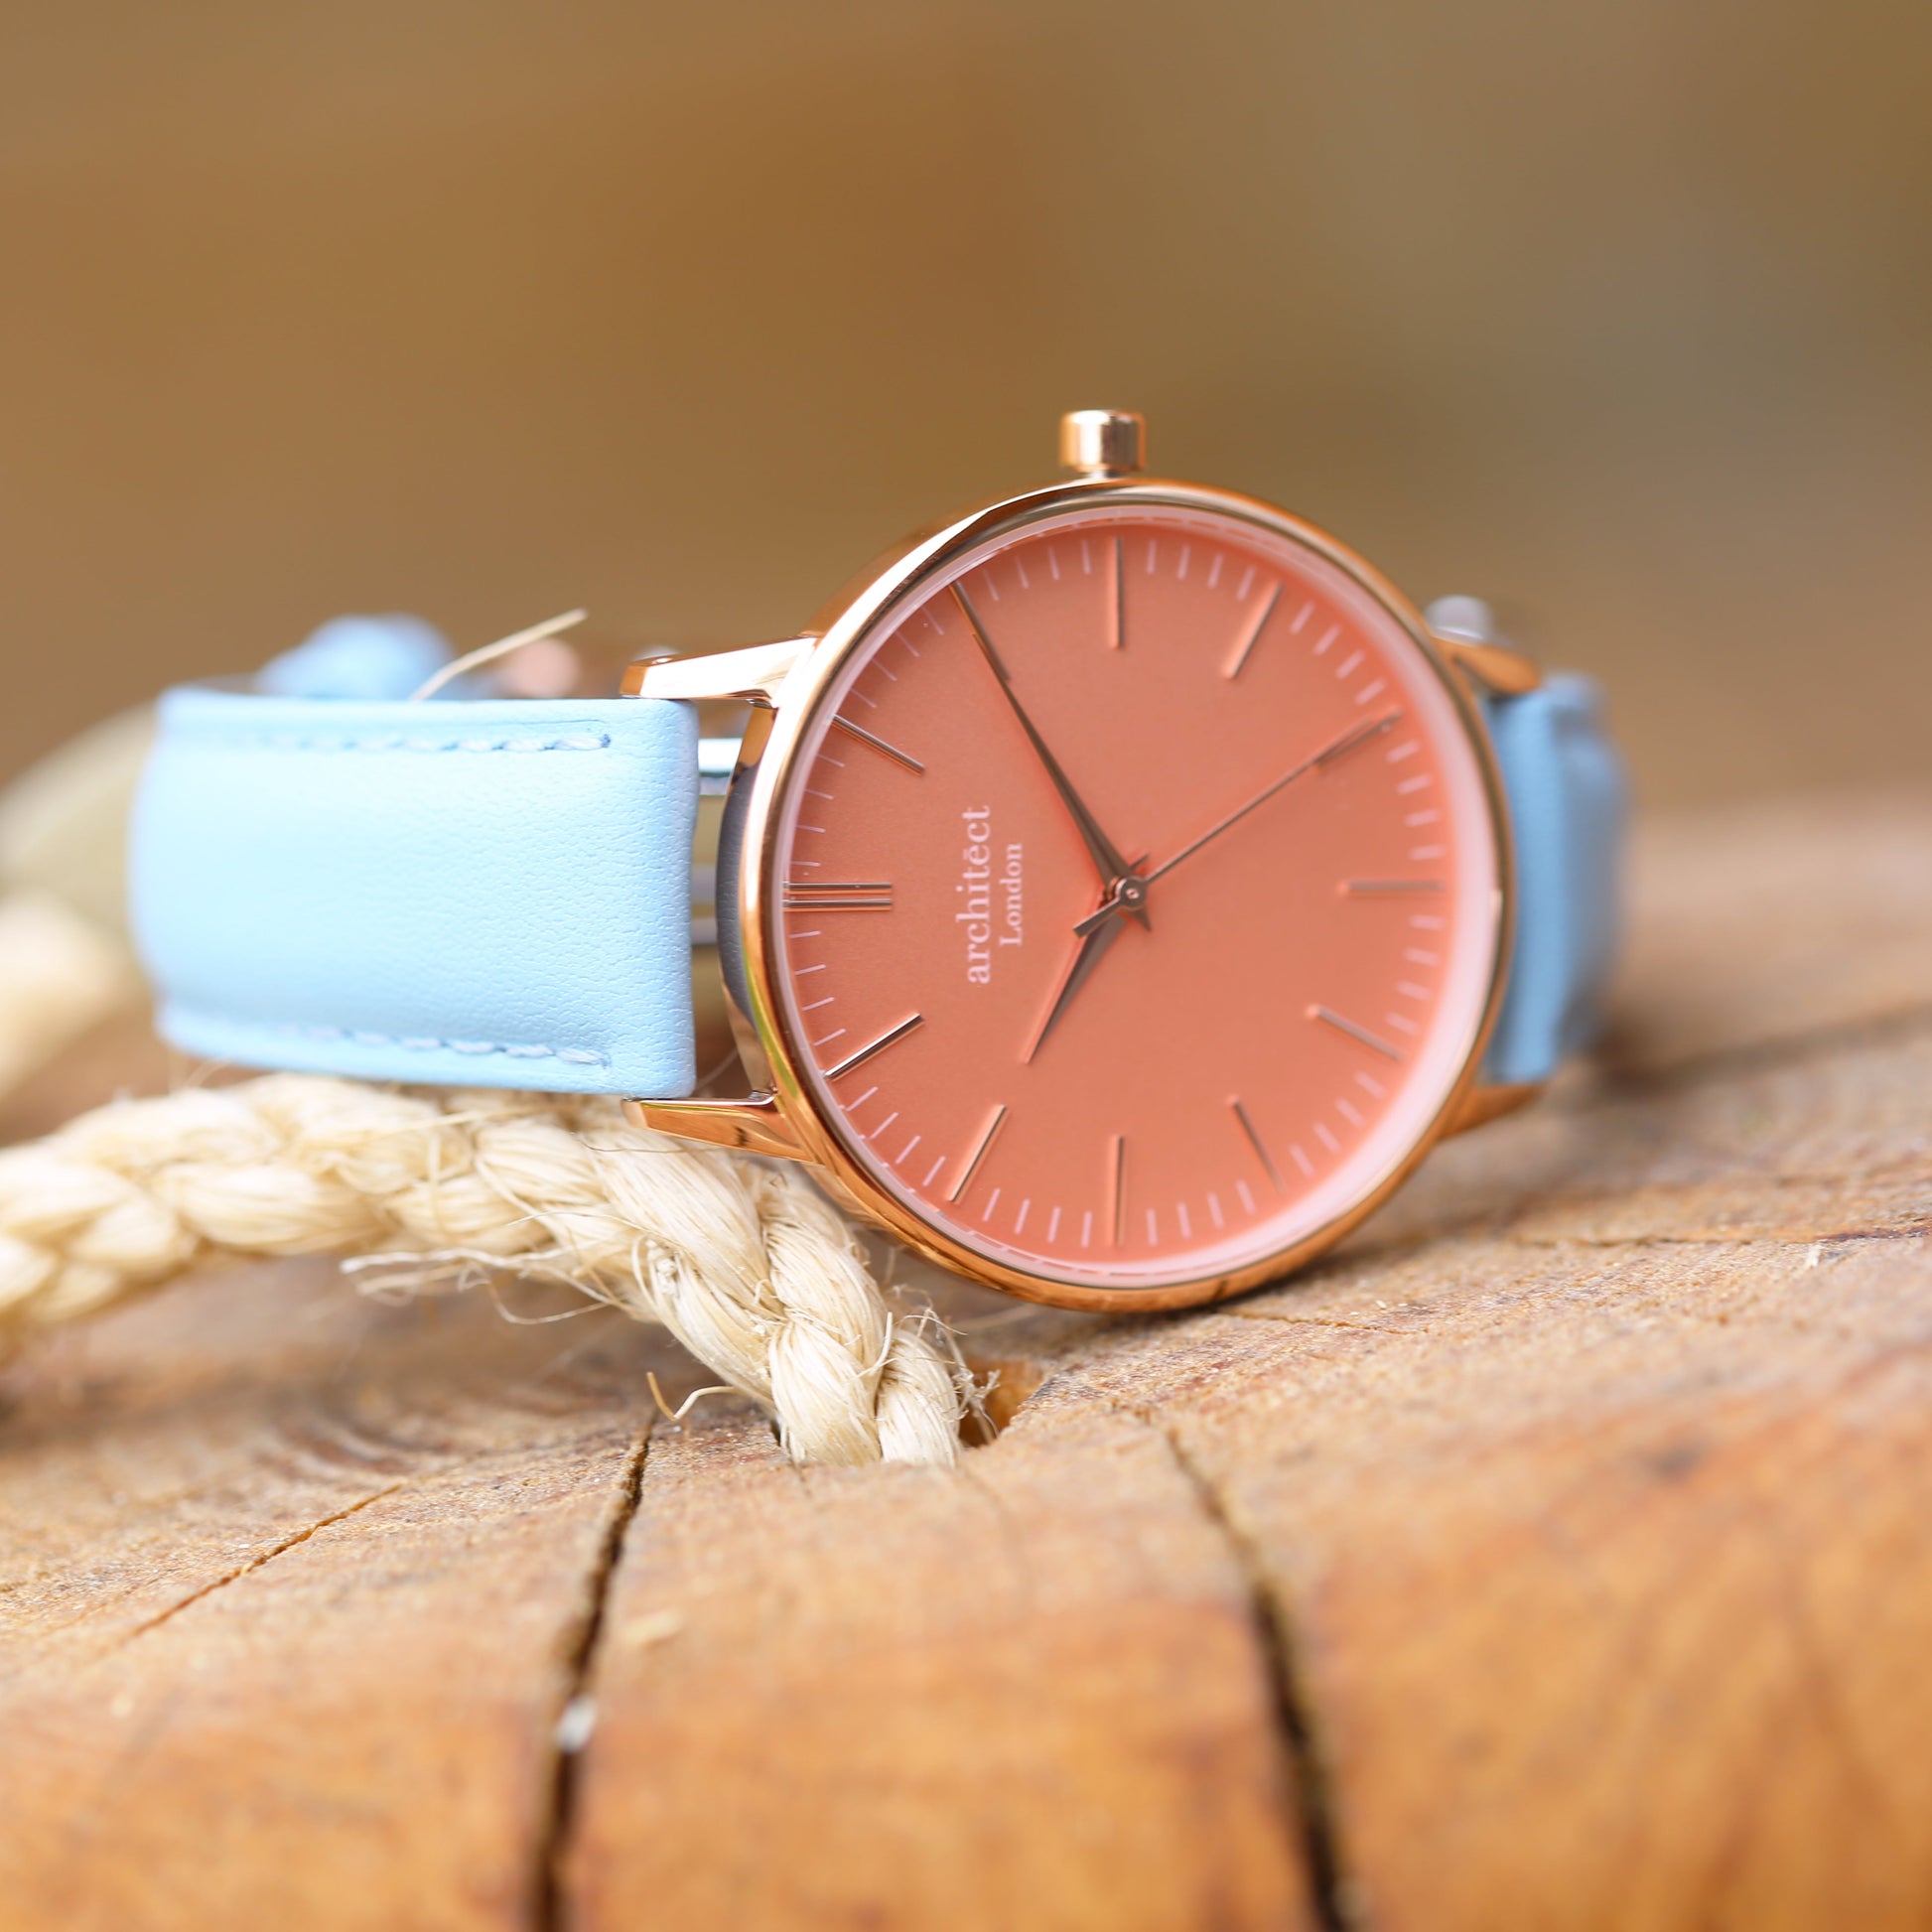 Personalized Ladies' Watches - Handwriting Engraved Watch in Light Blue 